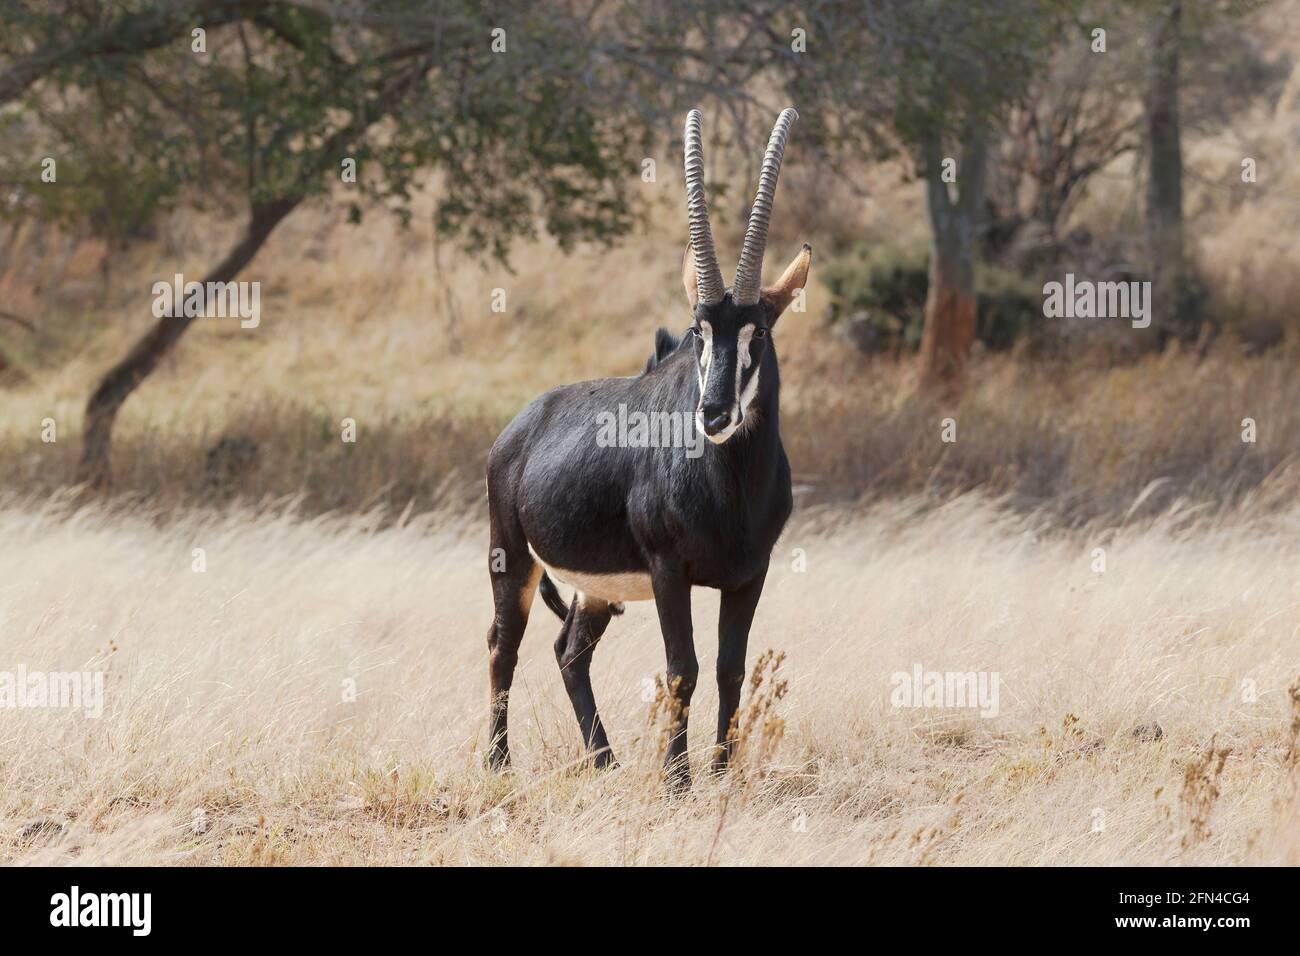 Giant Sable Antelope (Hippotragus niger variani) stands in grass. Angola Stock Photo